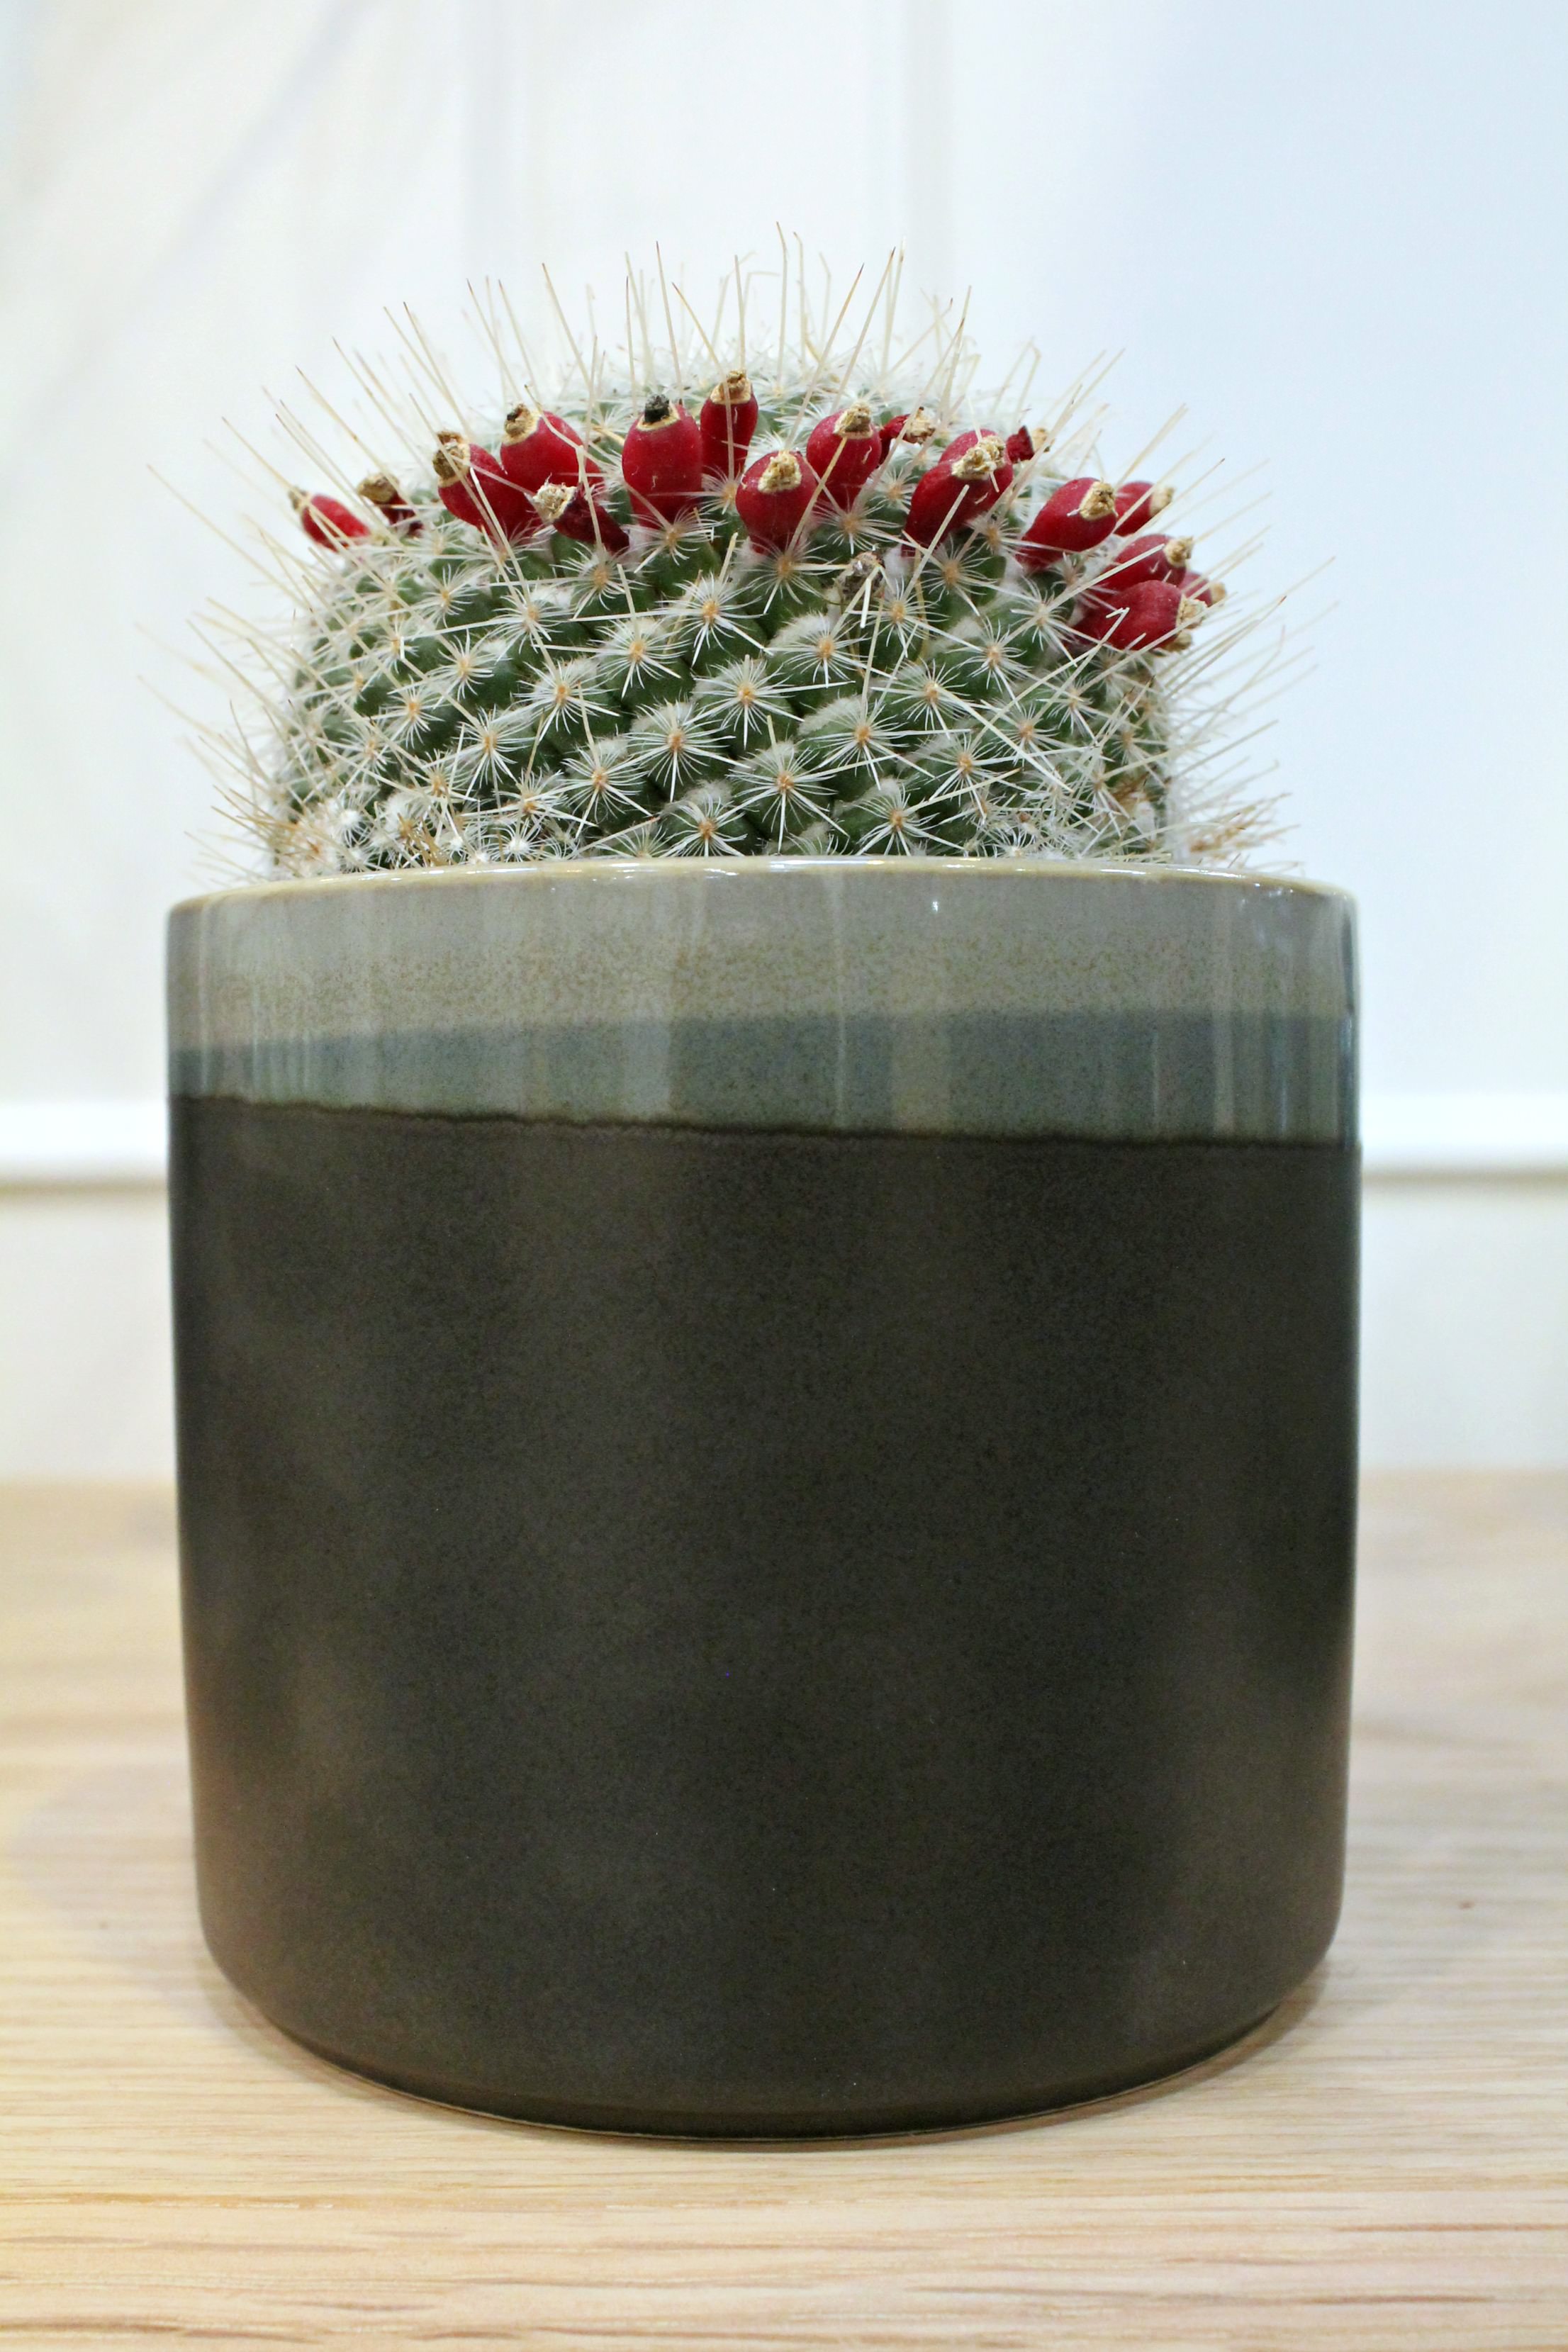 Cactus-in-planter-photo-by-Little-Big-Bell